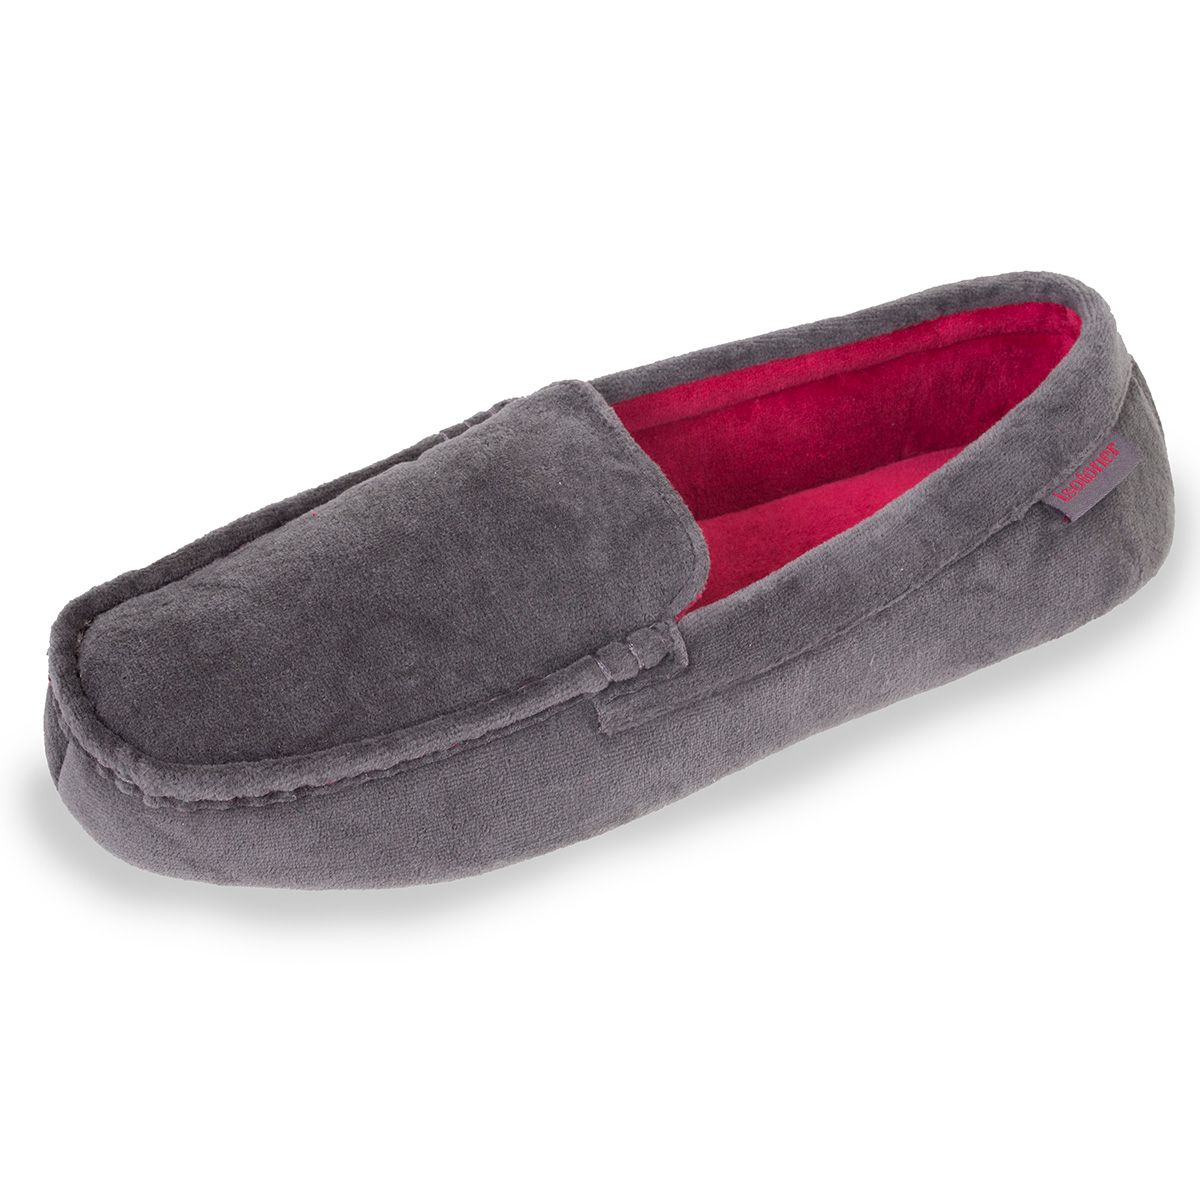 Chaussons homme : mocassins velours Isotoner